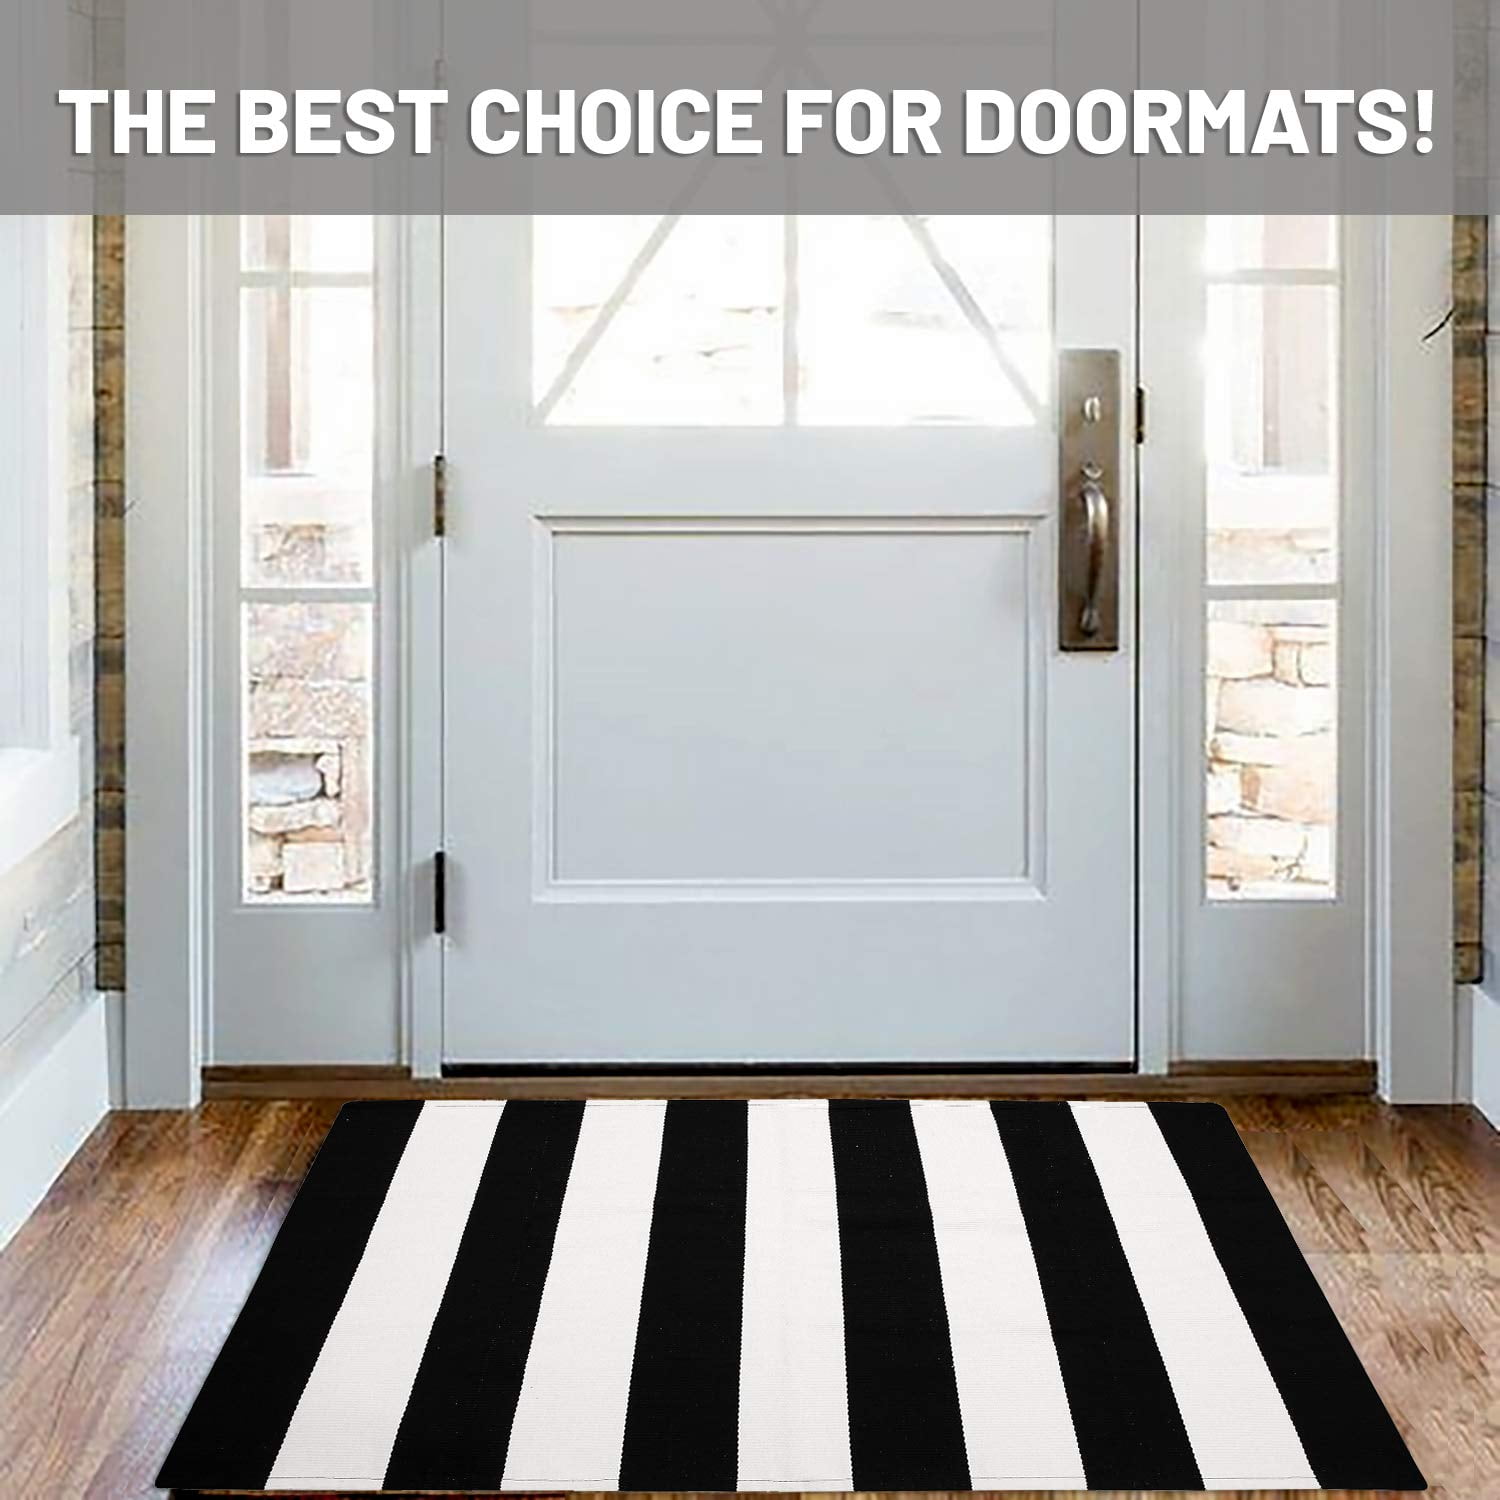 Collive Door Mat Black and White Striped 24x51,Washable Front Porch  Rug,Farmhouse Cotton Hand-Woven Layered Door Mats for Entryway Front  Door,Porch